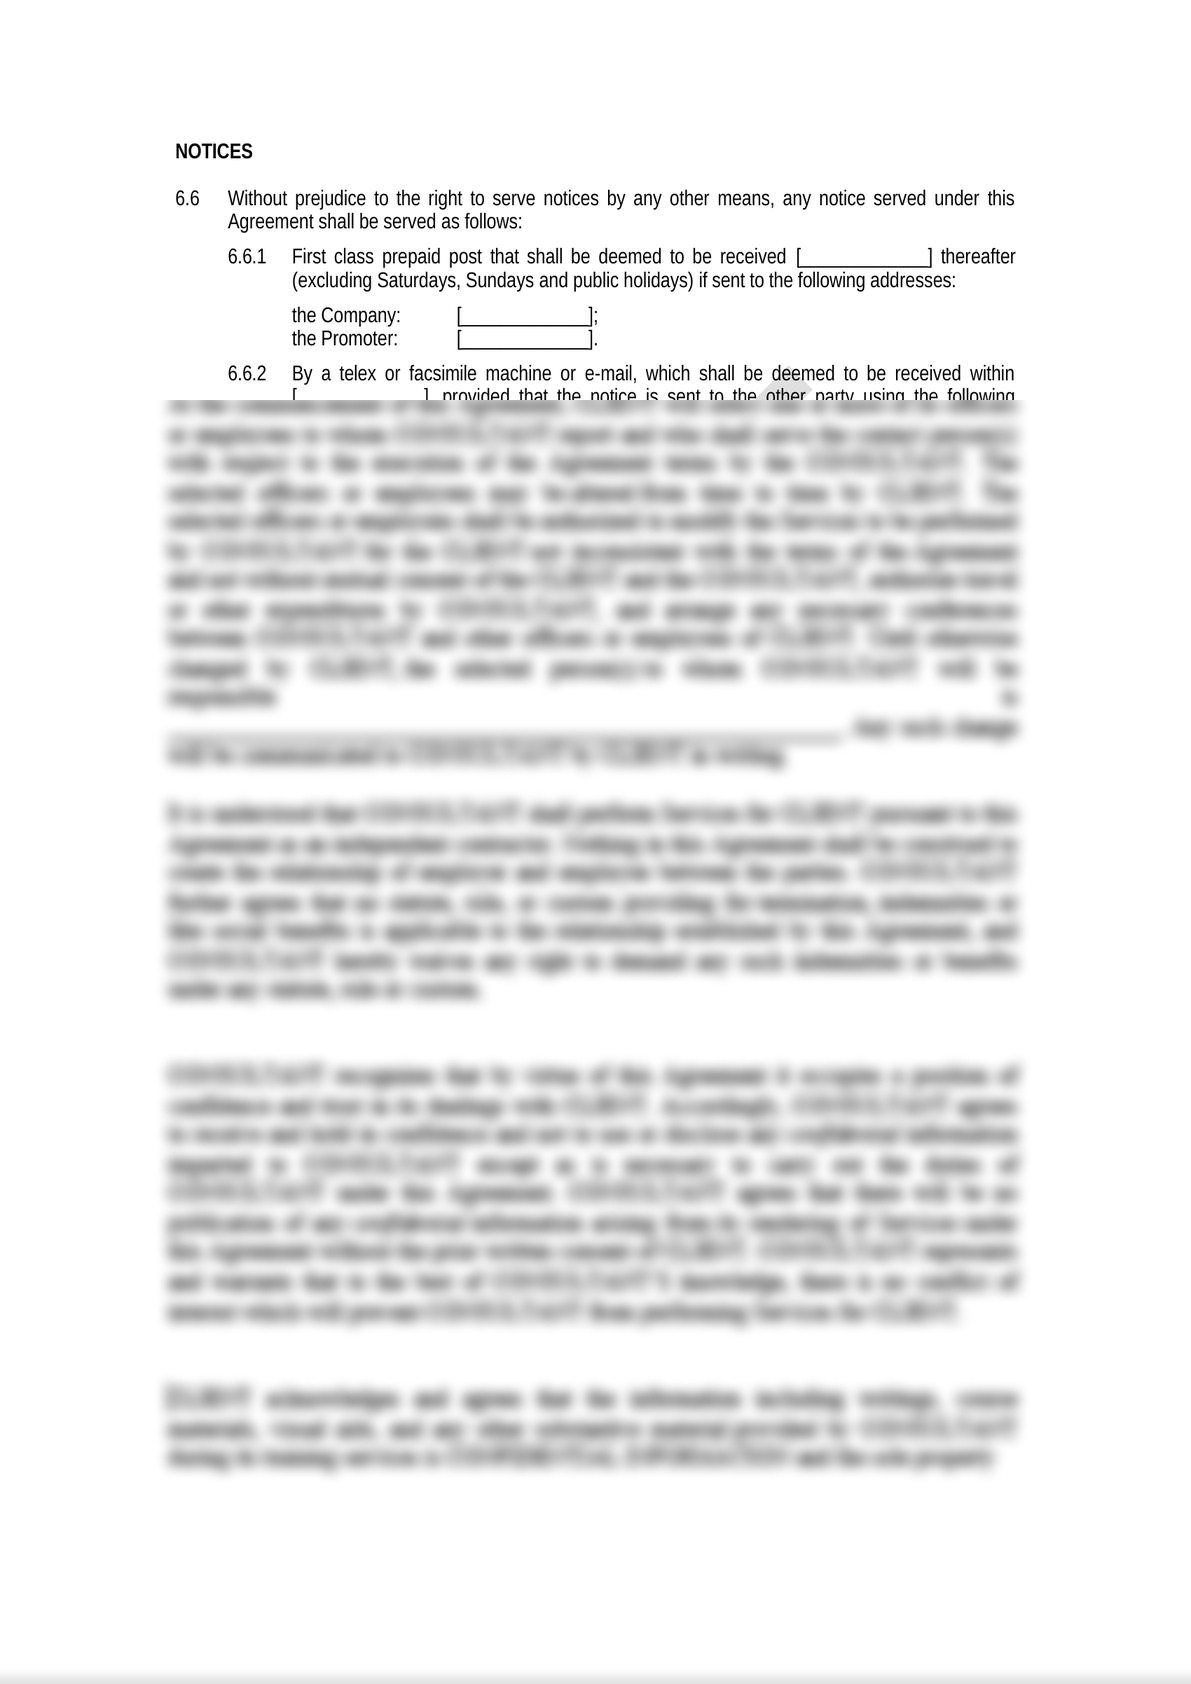 General Advertising & Promotion Agreement (Media Law)-4